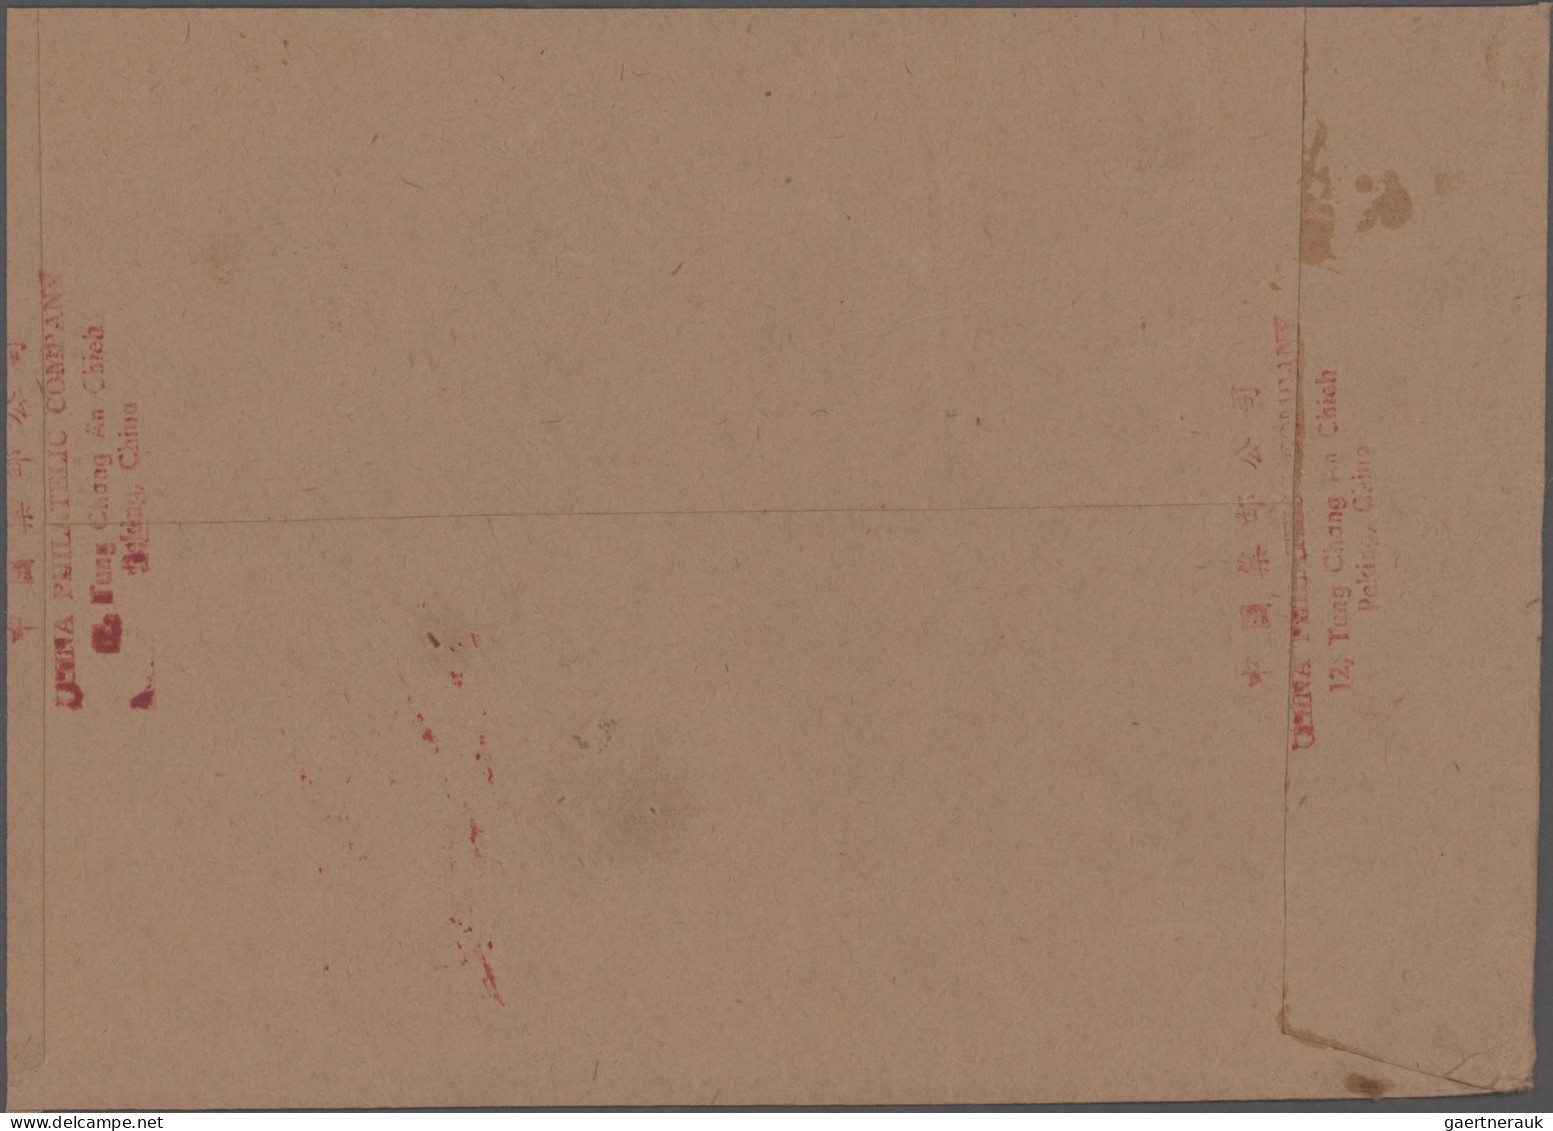 China (PRC): 1962, Two Registered Covers Of The China Philatelic Company, One Be - Storia Postale